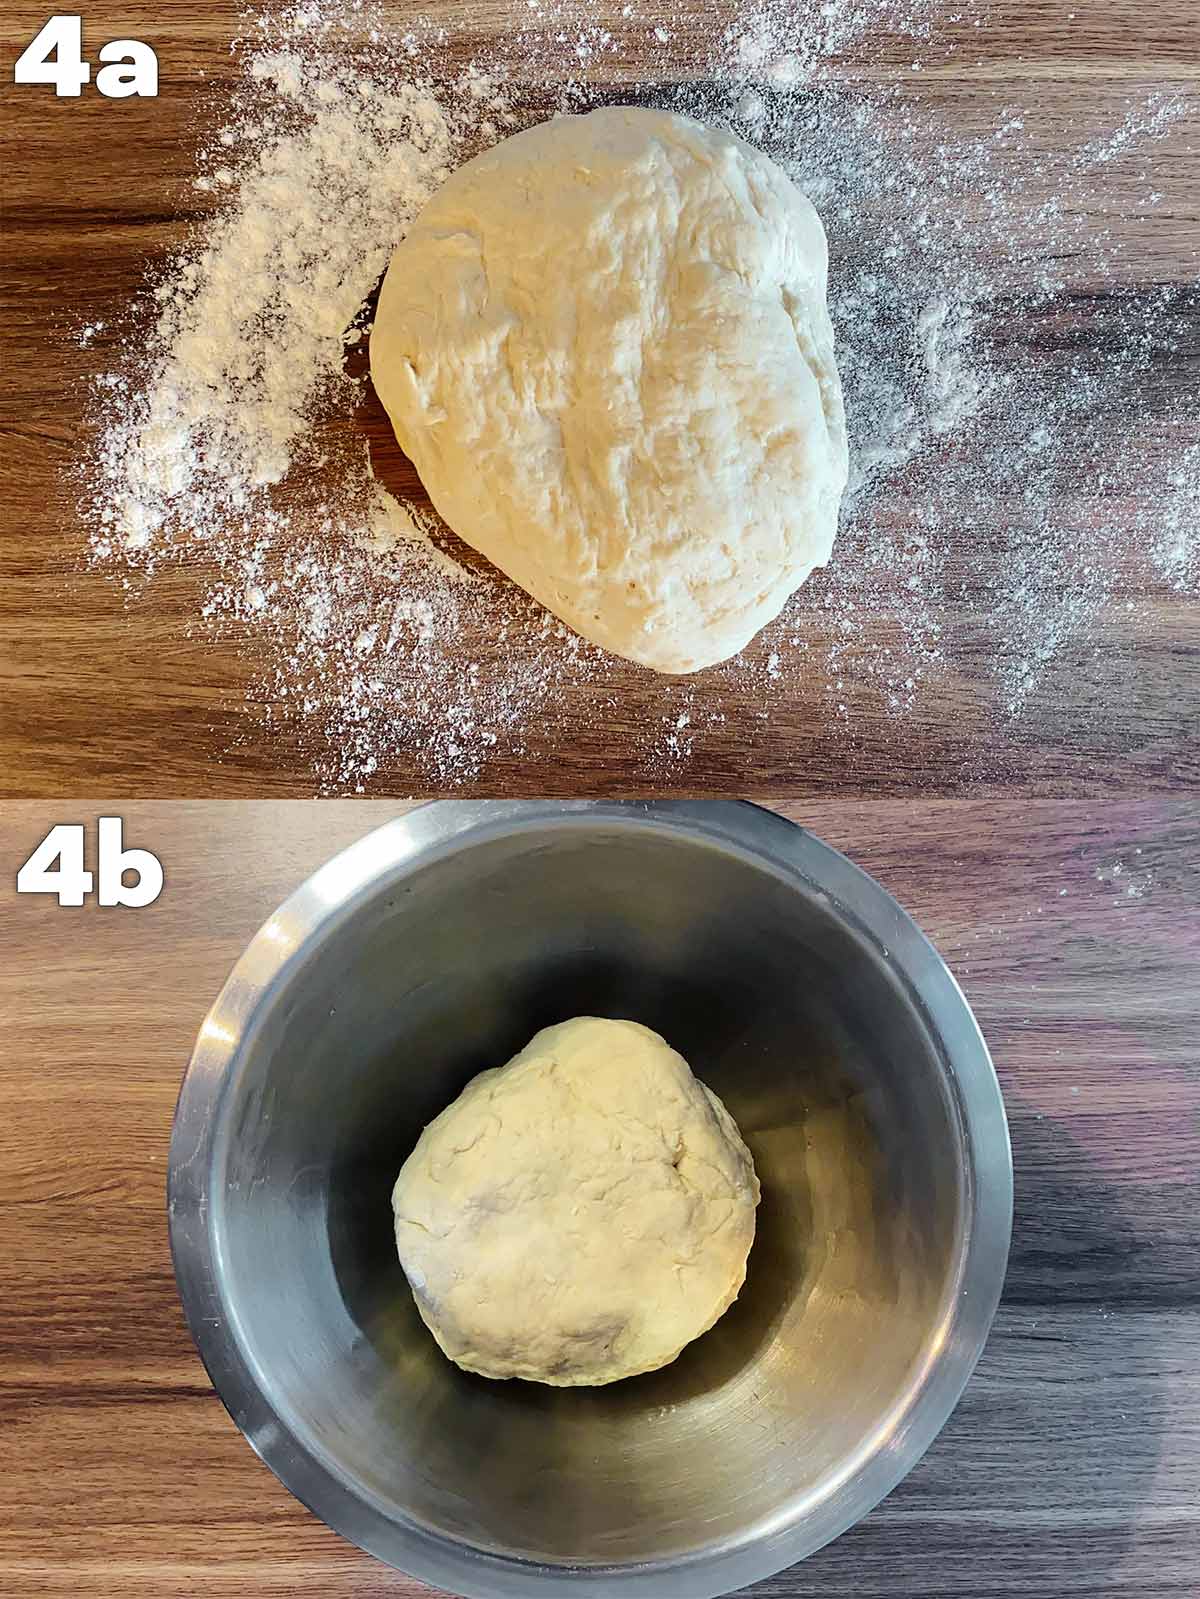 Two shot collage of a ball of dough on a work surface and then in a metal bowl.